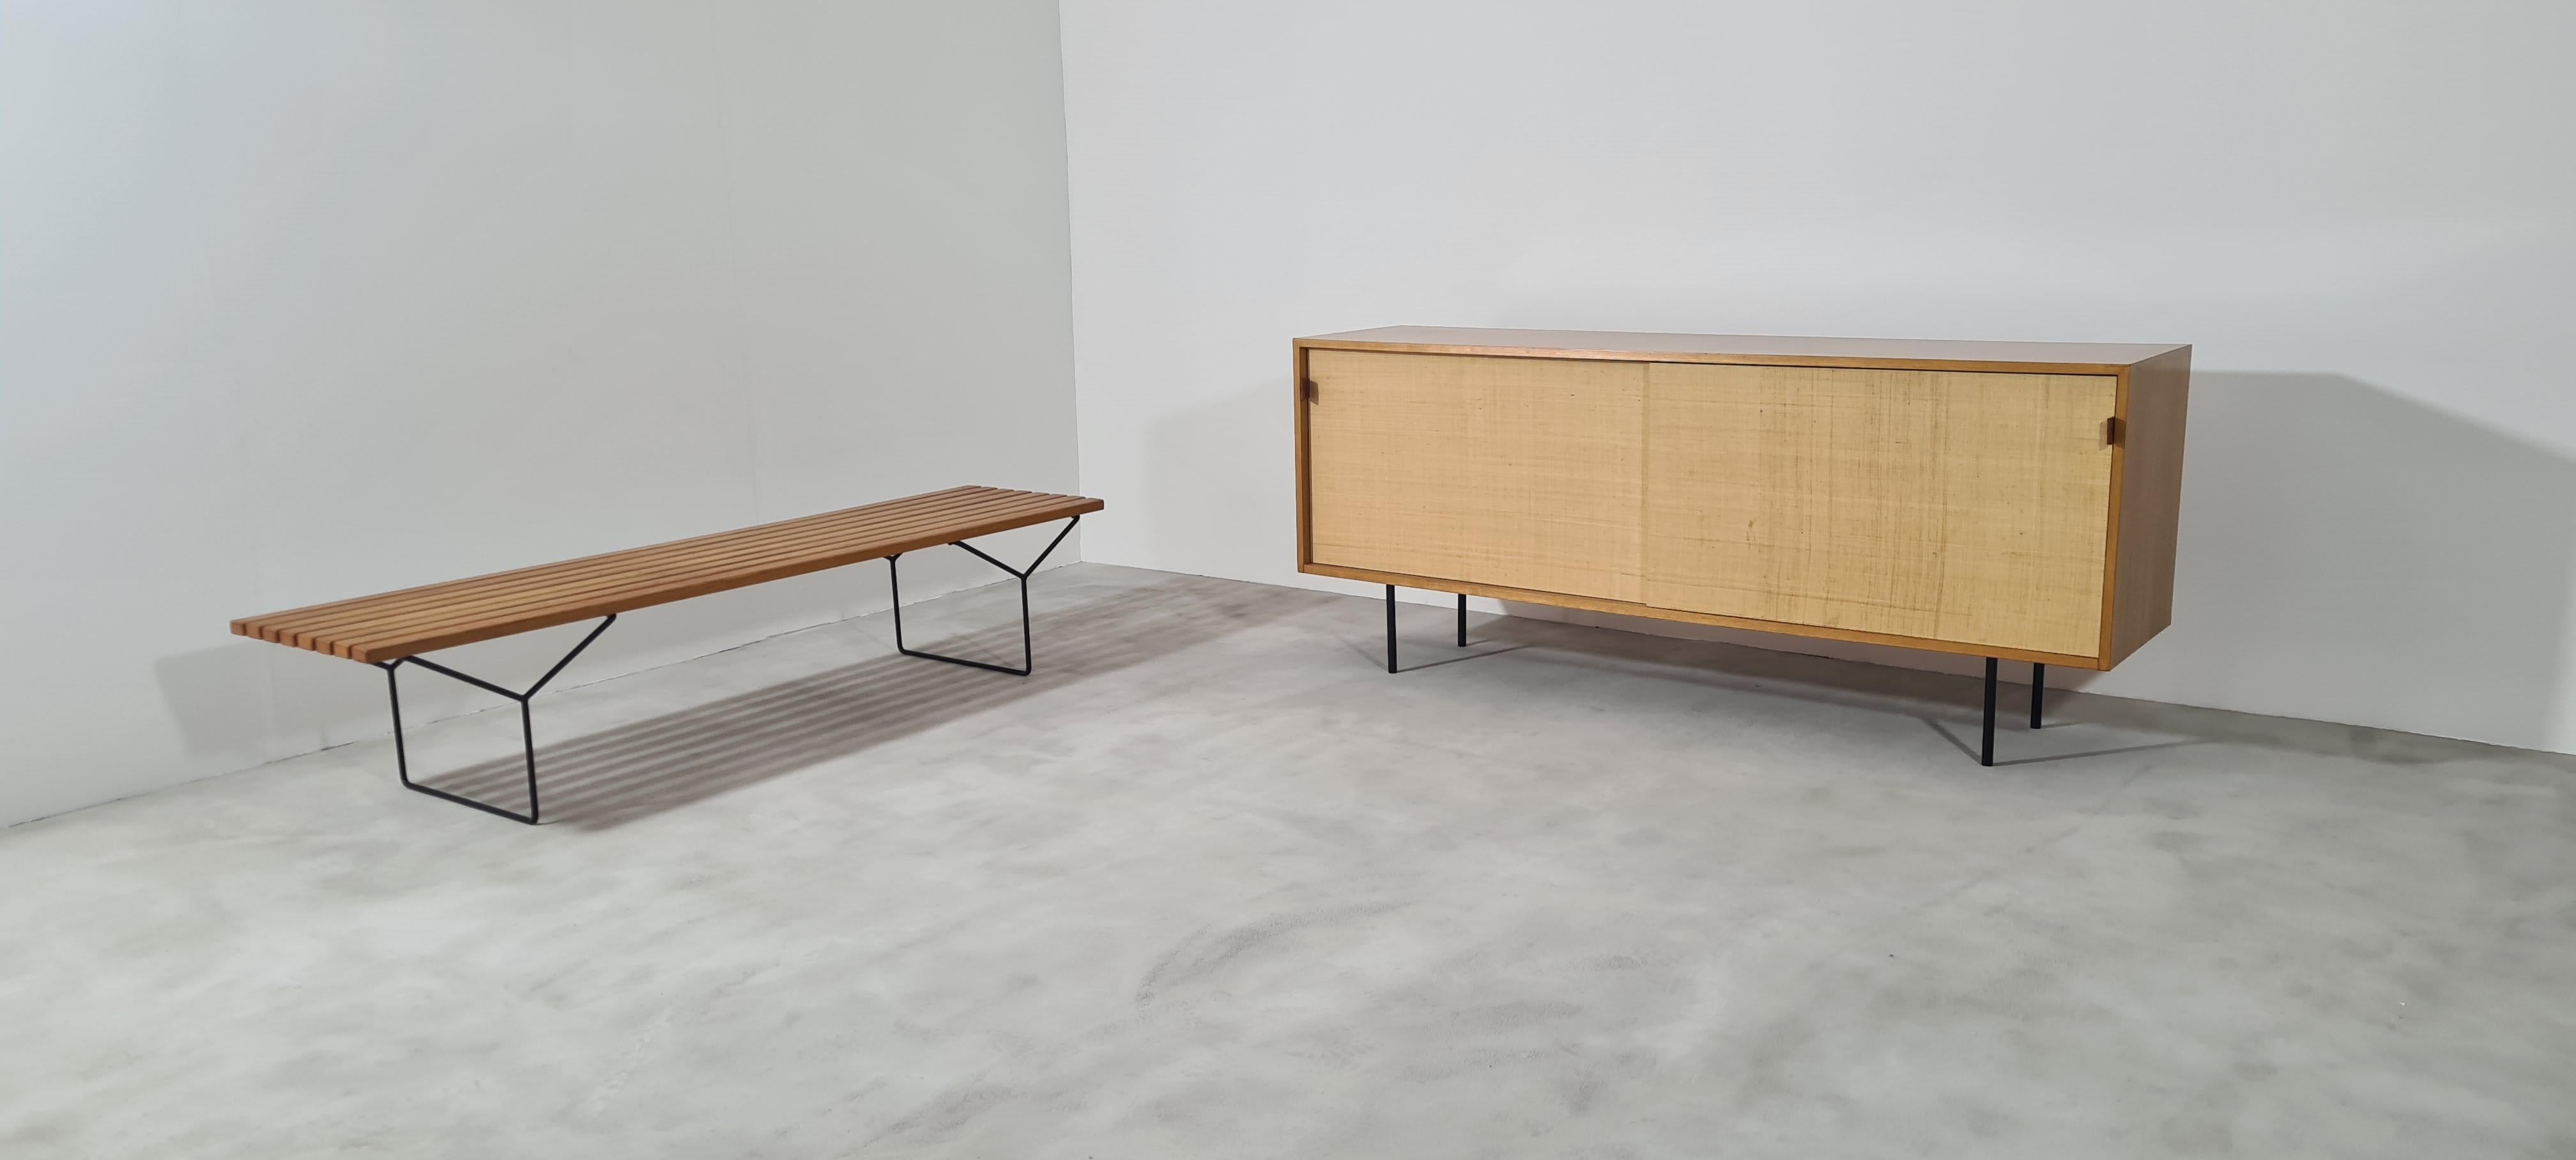 German Sideboard Credenza Florence Knoll with Sliding Doors Sea Grass Knoll 1960's For Sale